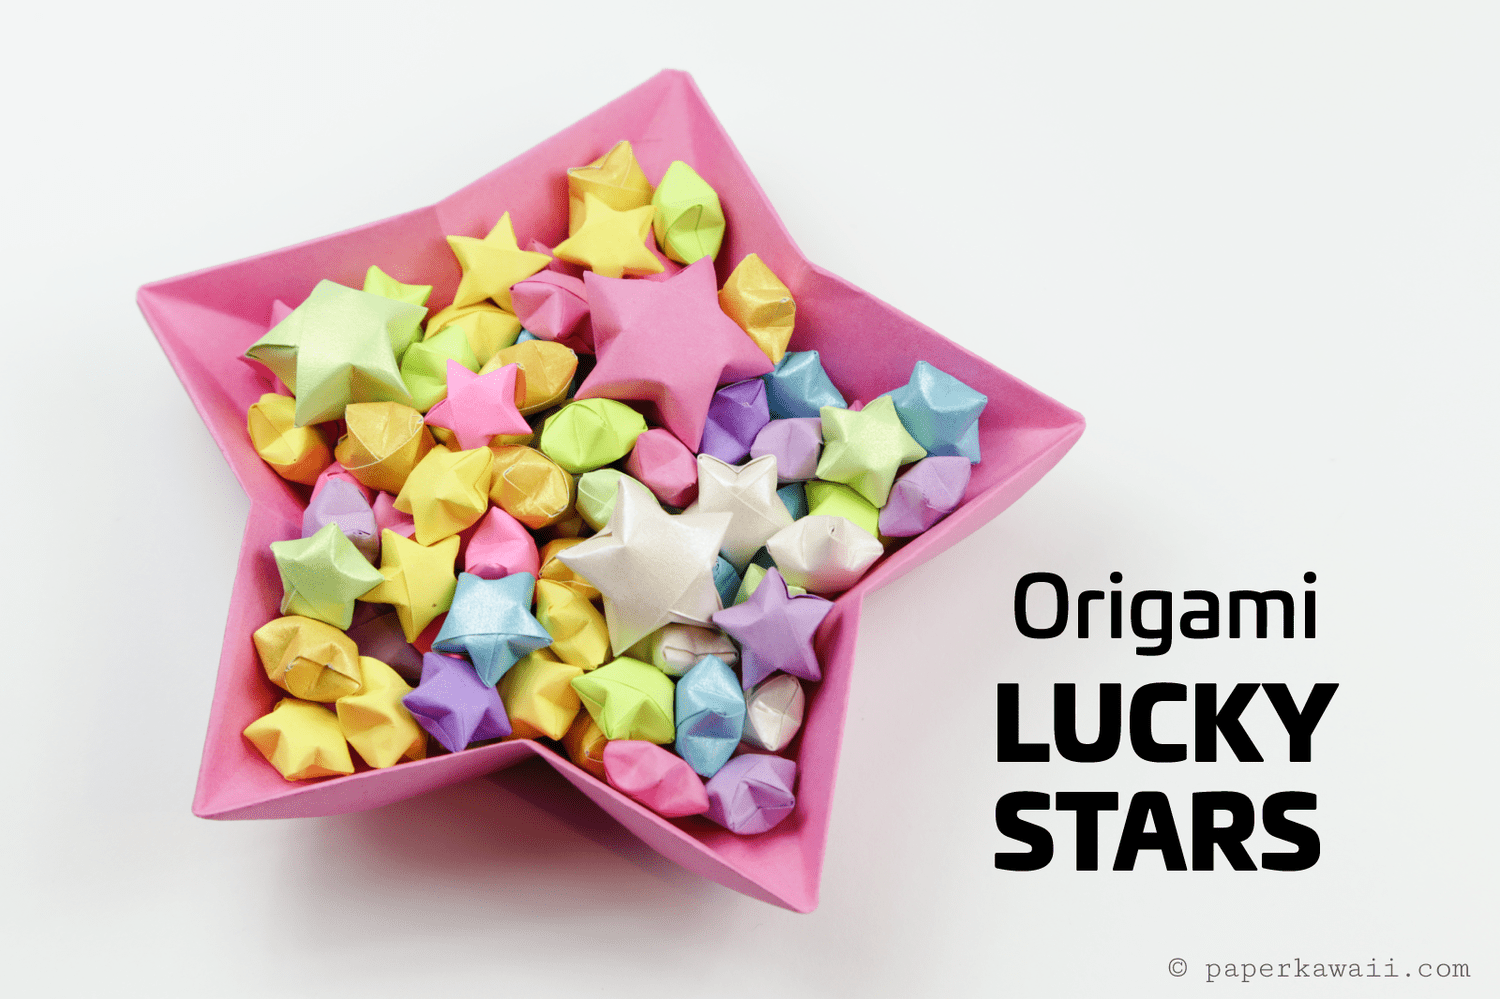 Origami lucky stars bowl with several dozen origami stars inside.